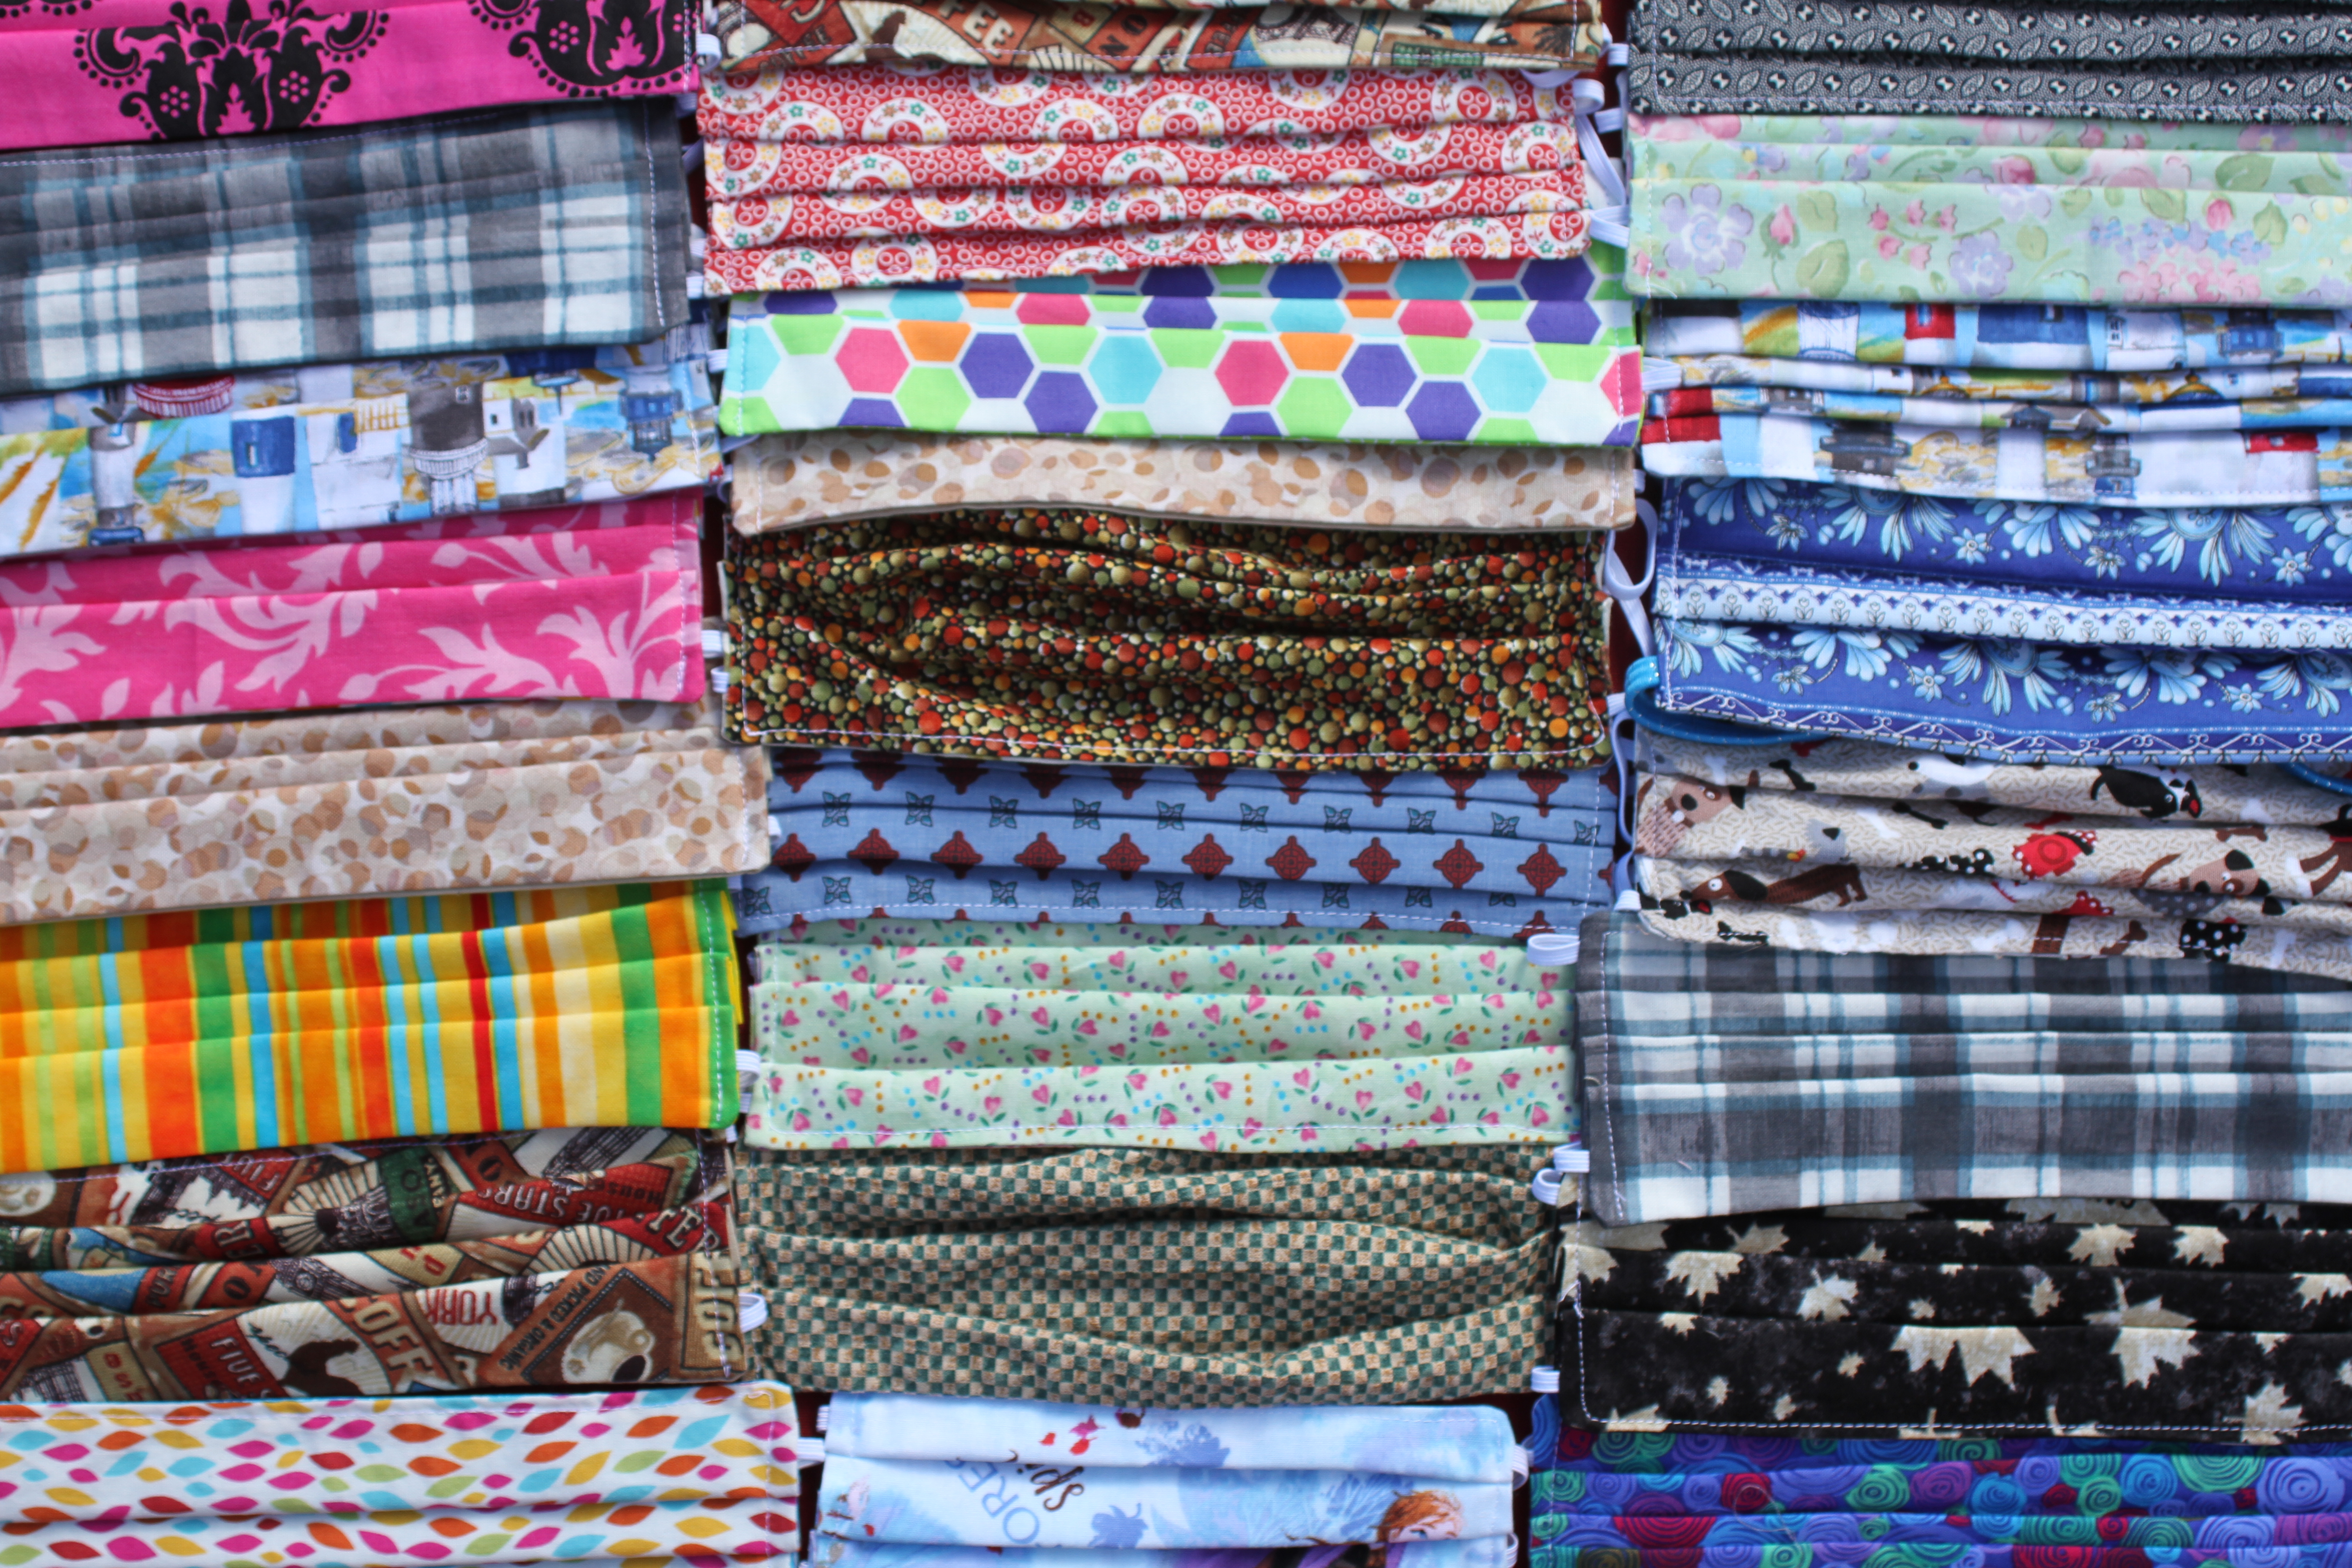 Photograph of colourful stacks of COVID face masks 